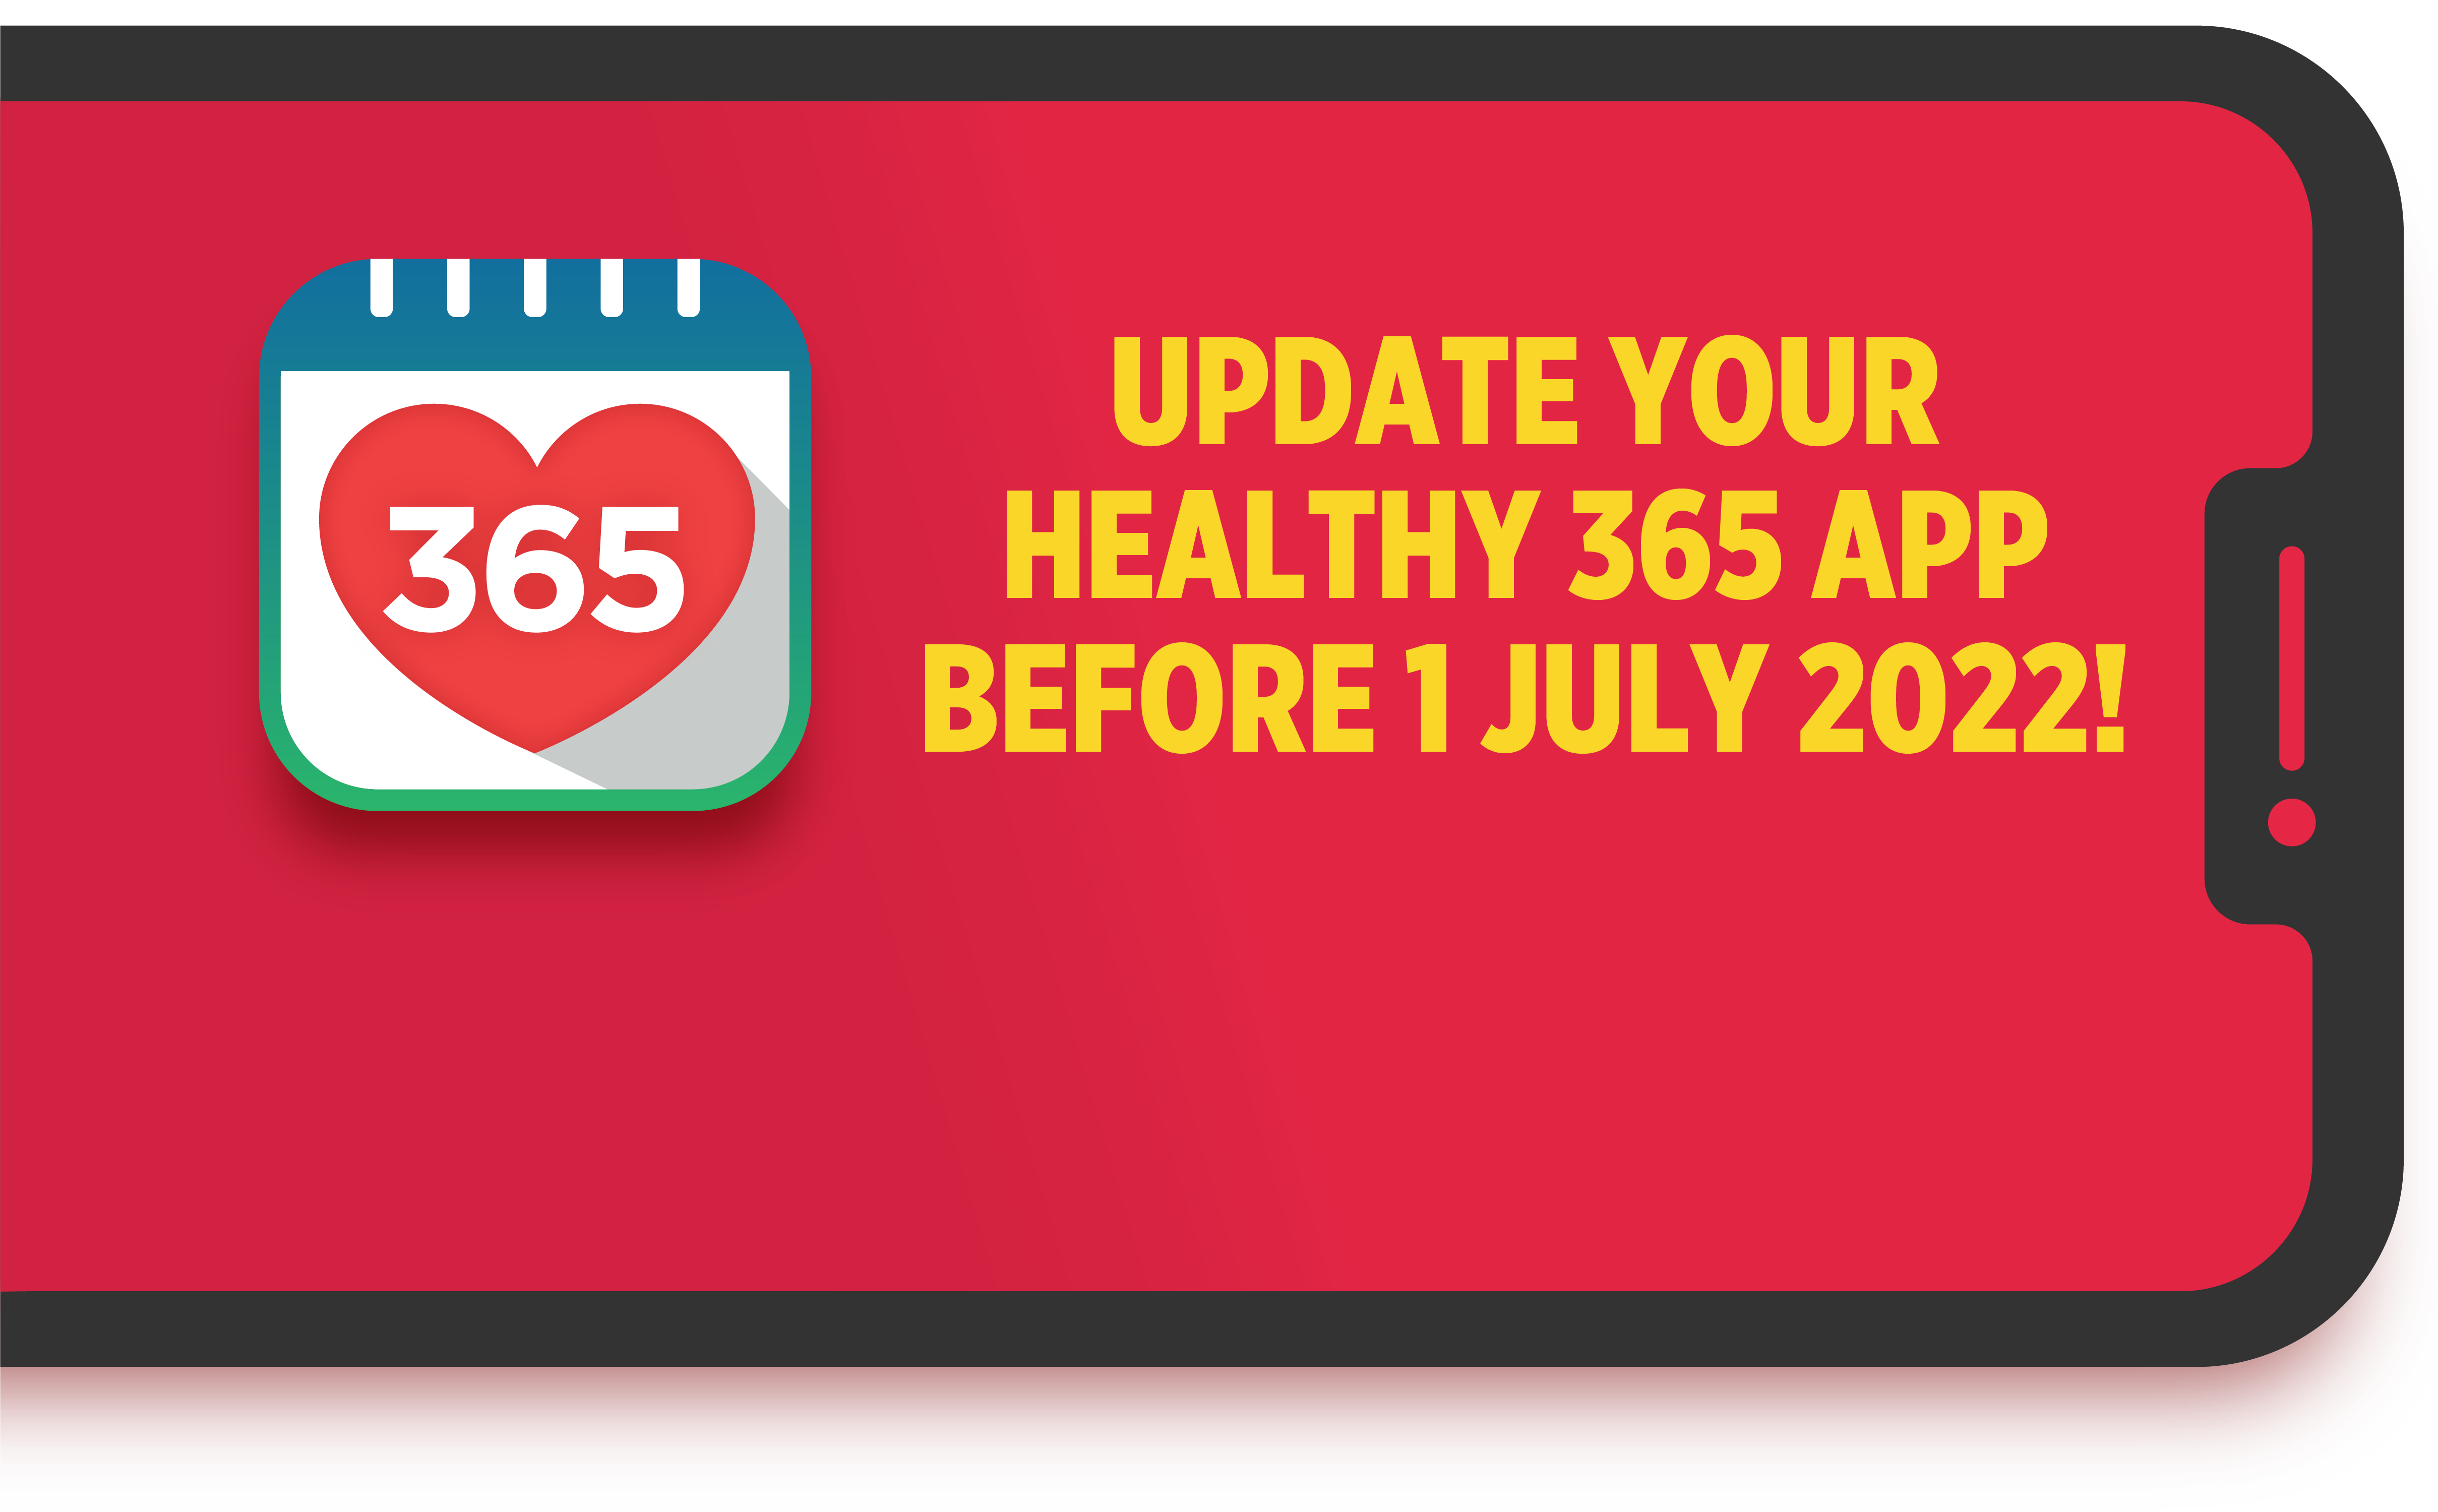 Update your healthy 365 app before 1 July 2022!